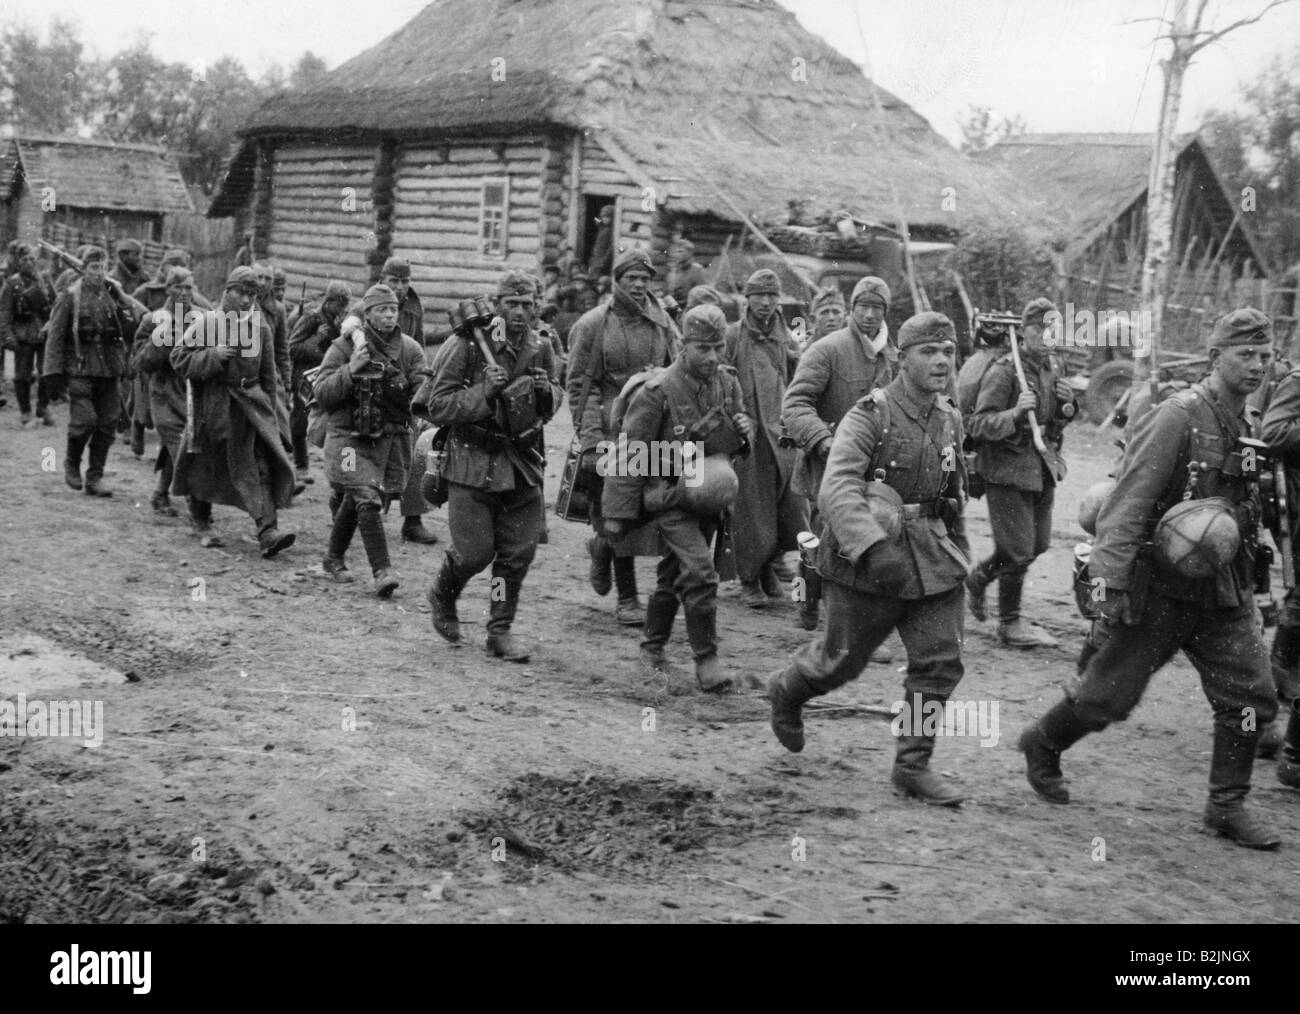 events, Second World War / WWII, Russia, marching German infantry, autumn 1941, Stock Photo